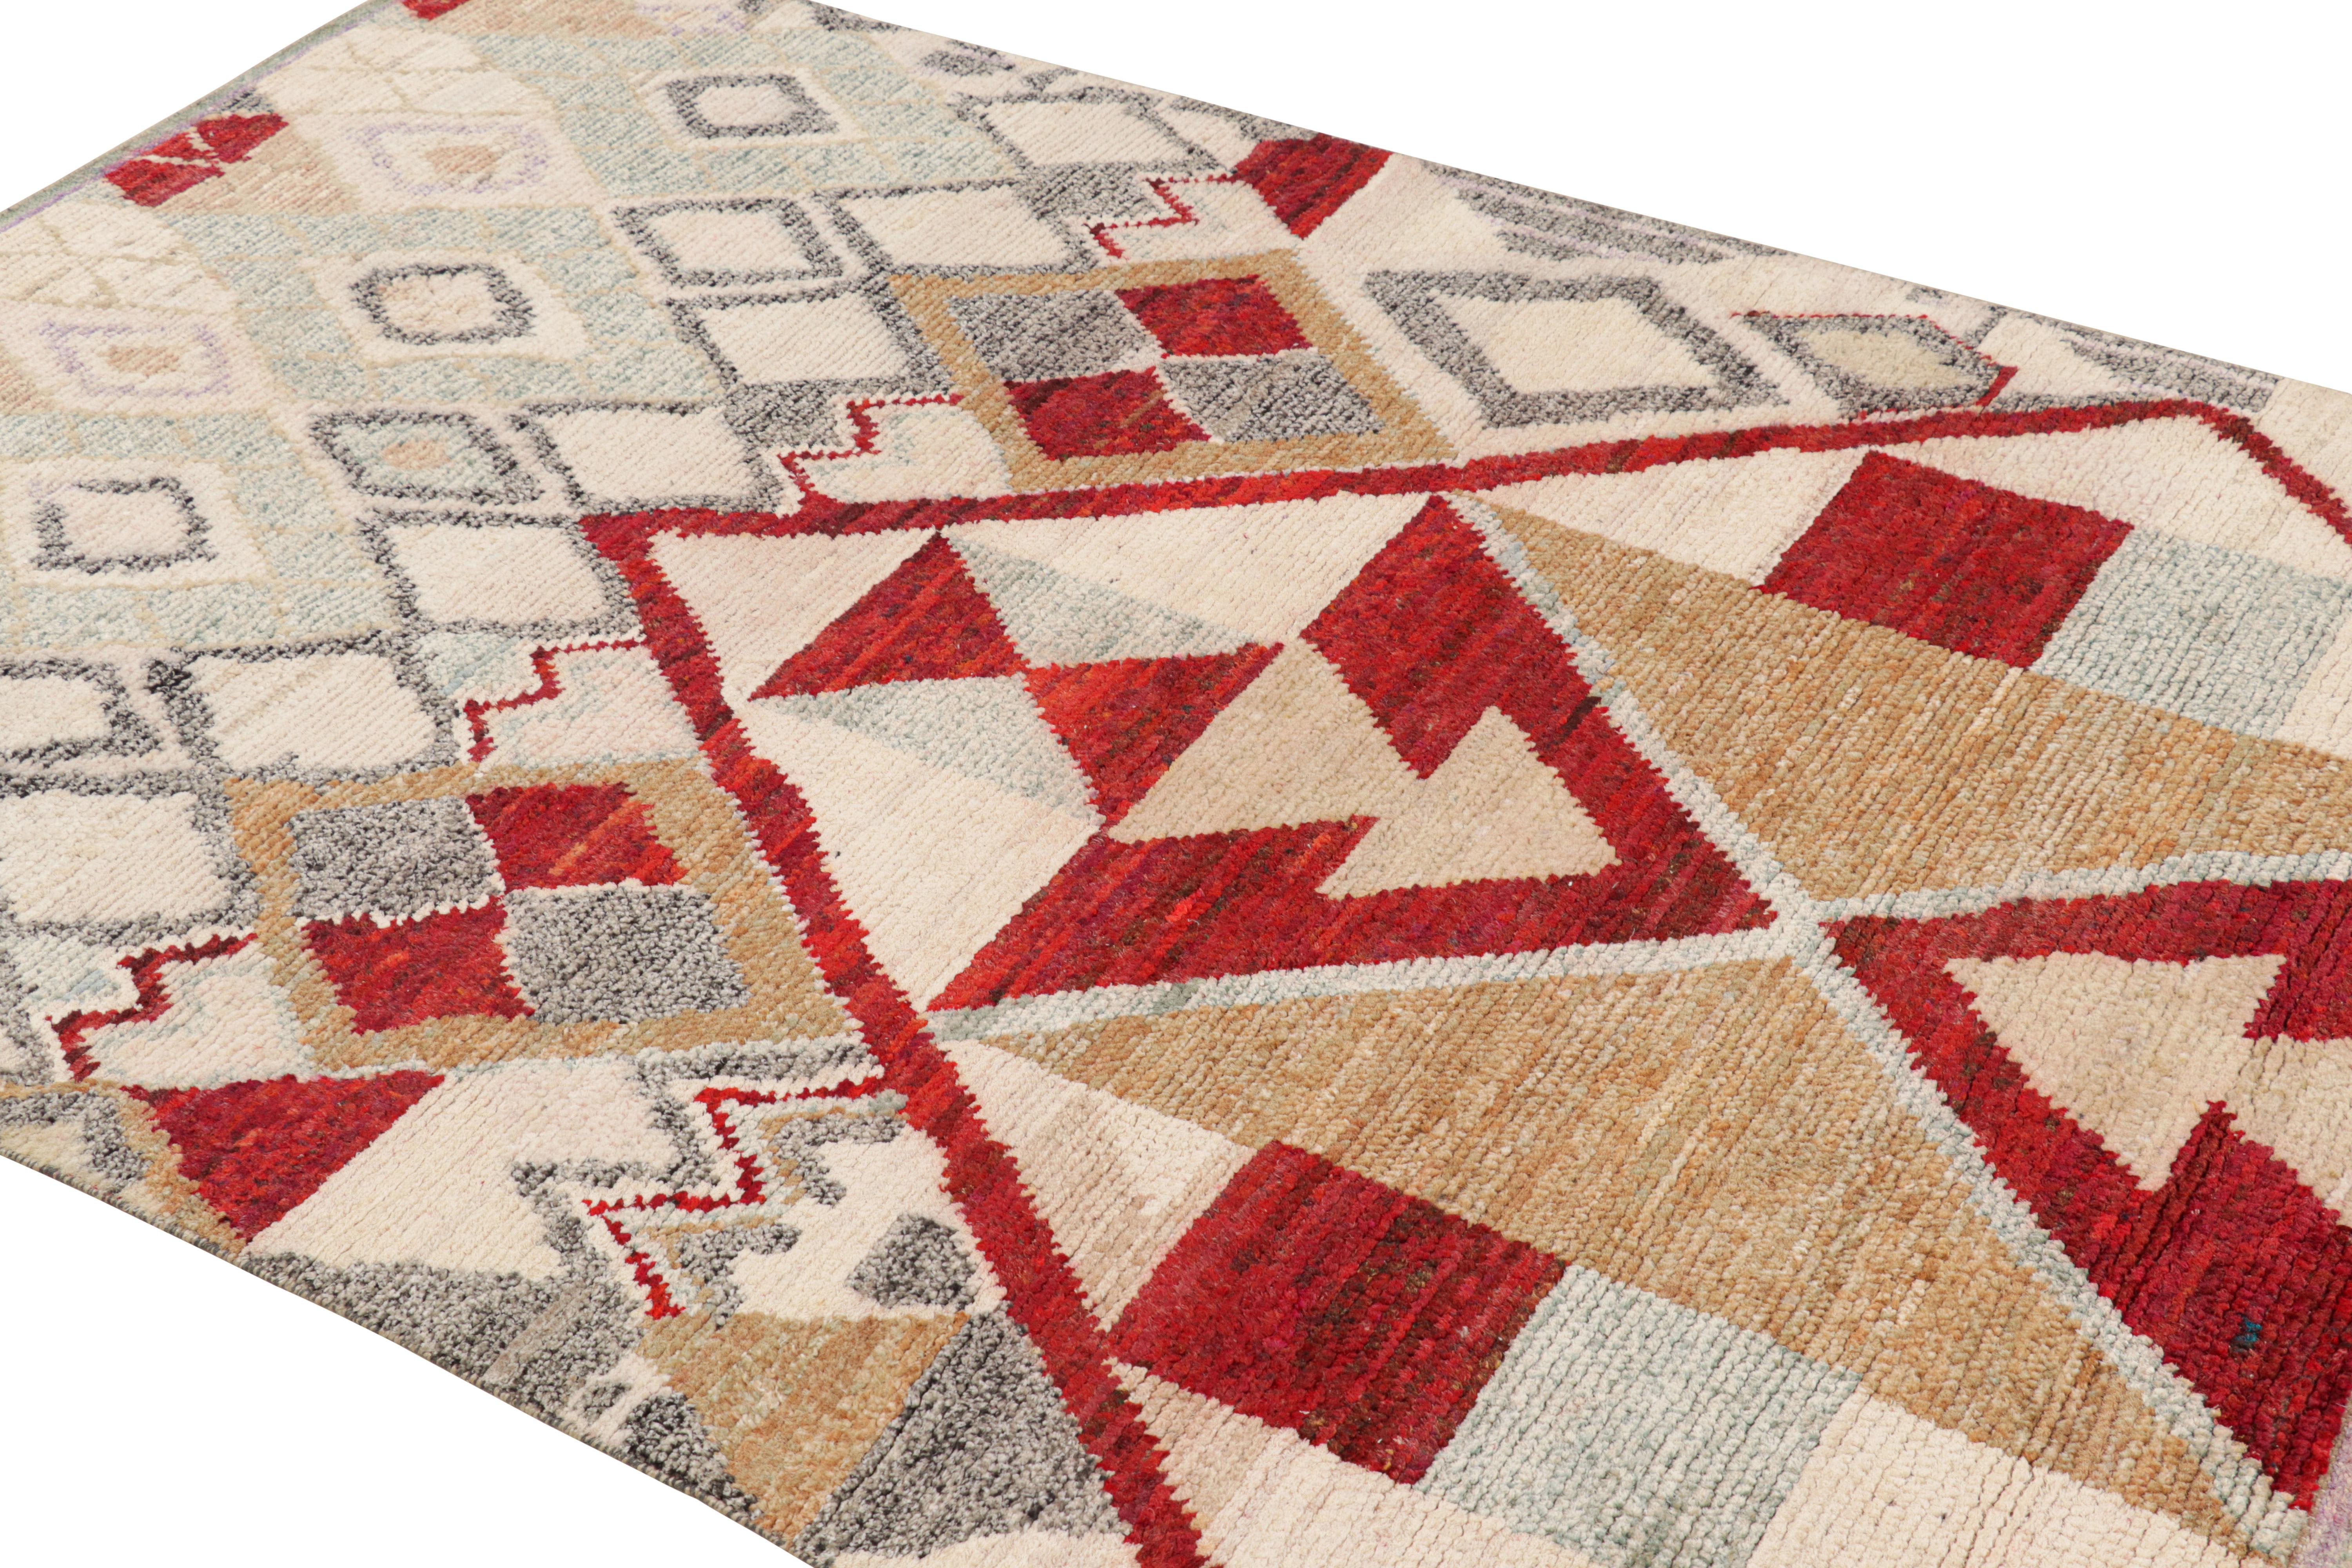 Hand-Knotted Rug & Kilim’s Contemporary Moroccan Style Rug Polychromatic Geometric Patterns For Sale